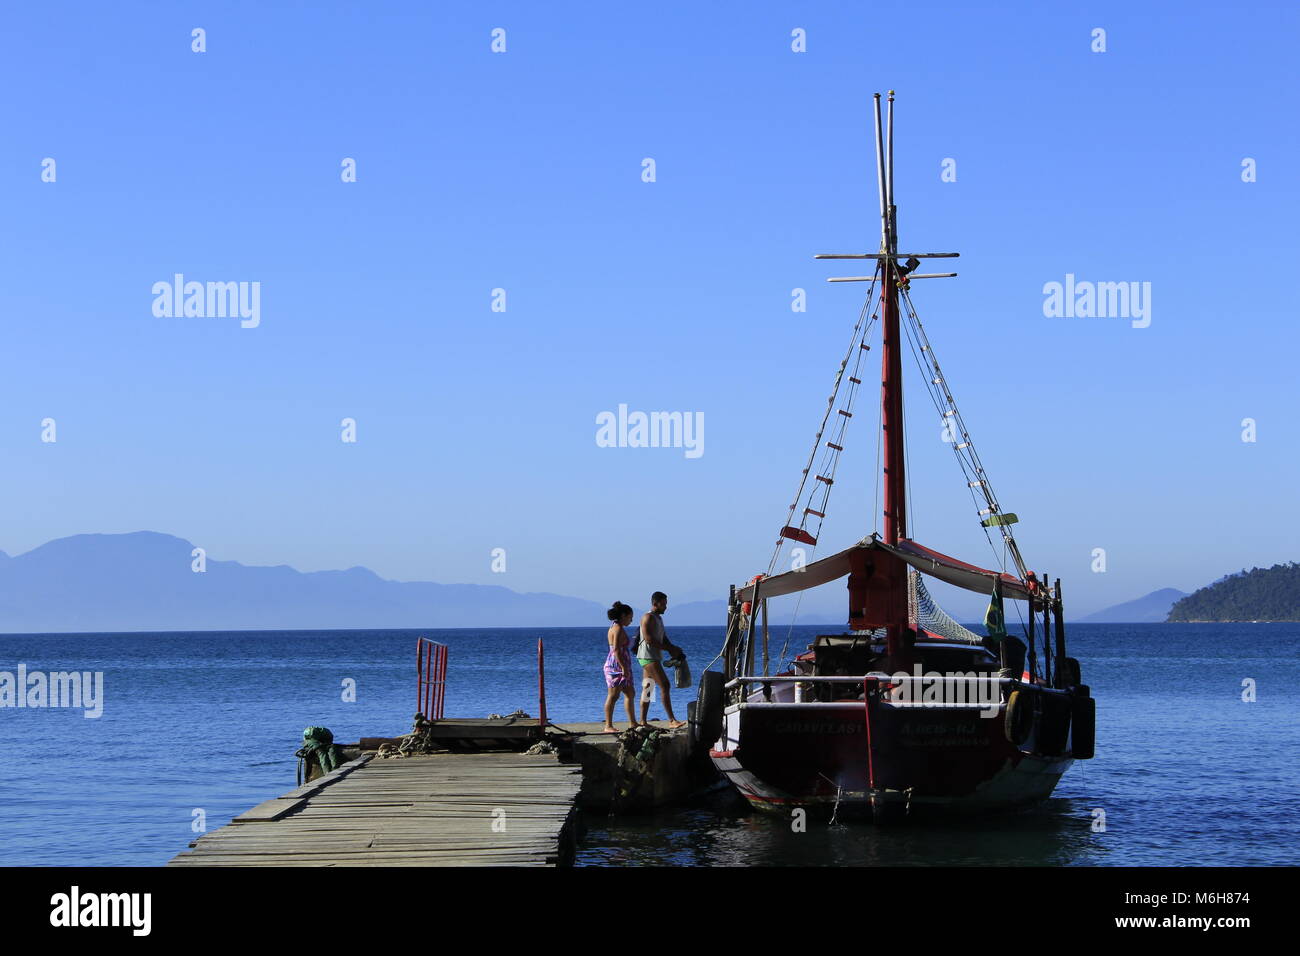 Couple boarding a sailboat docked at a pier in Ilha Grande, Brazil Stock Photo